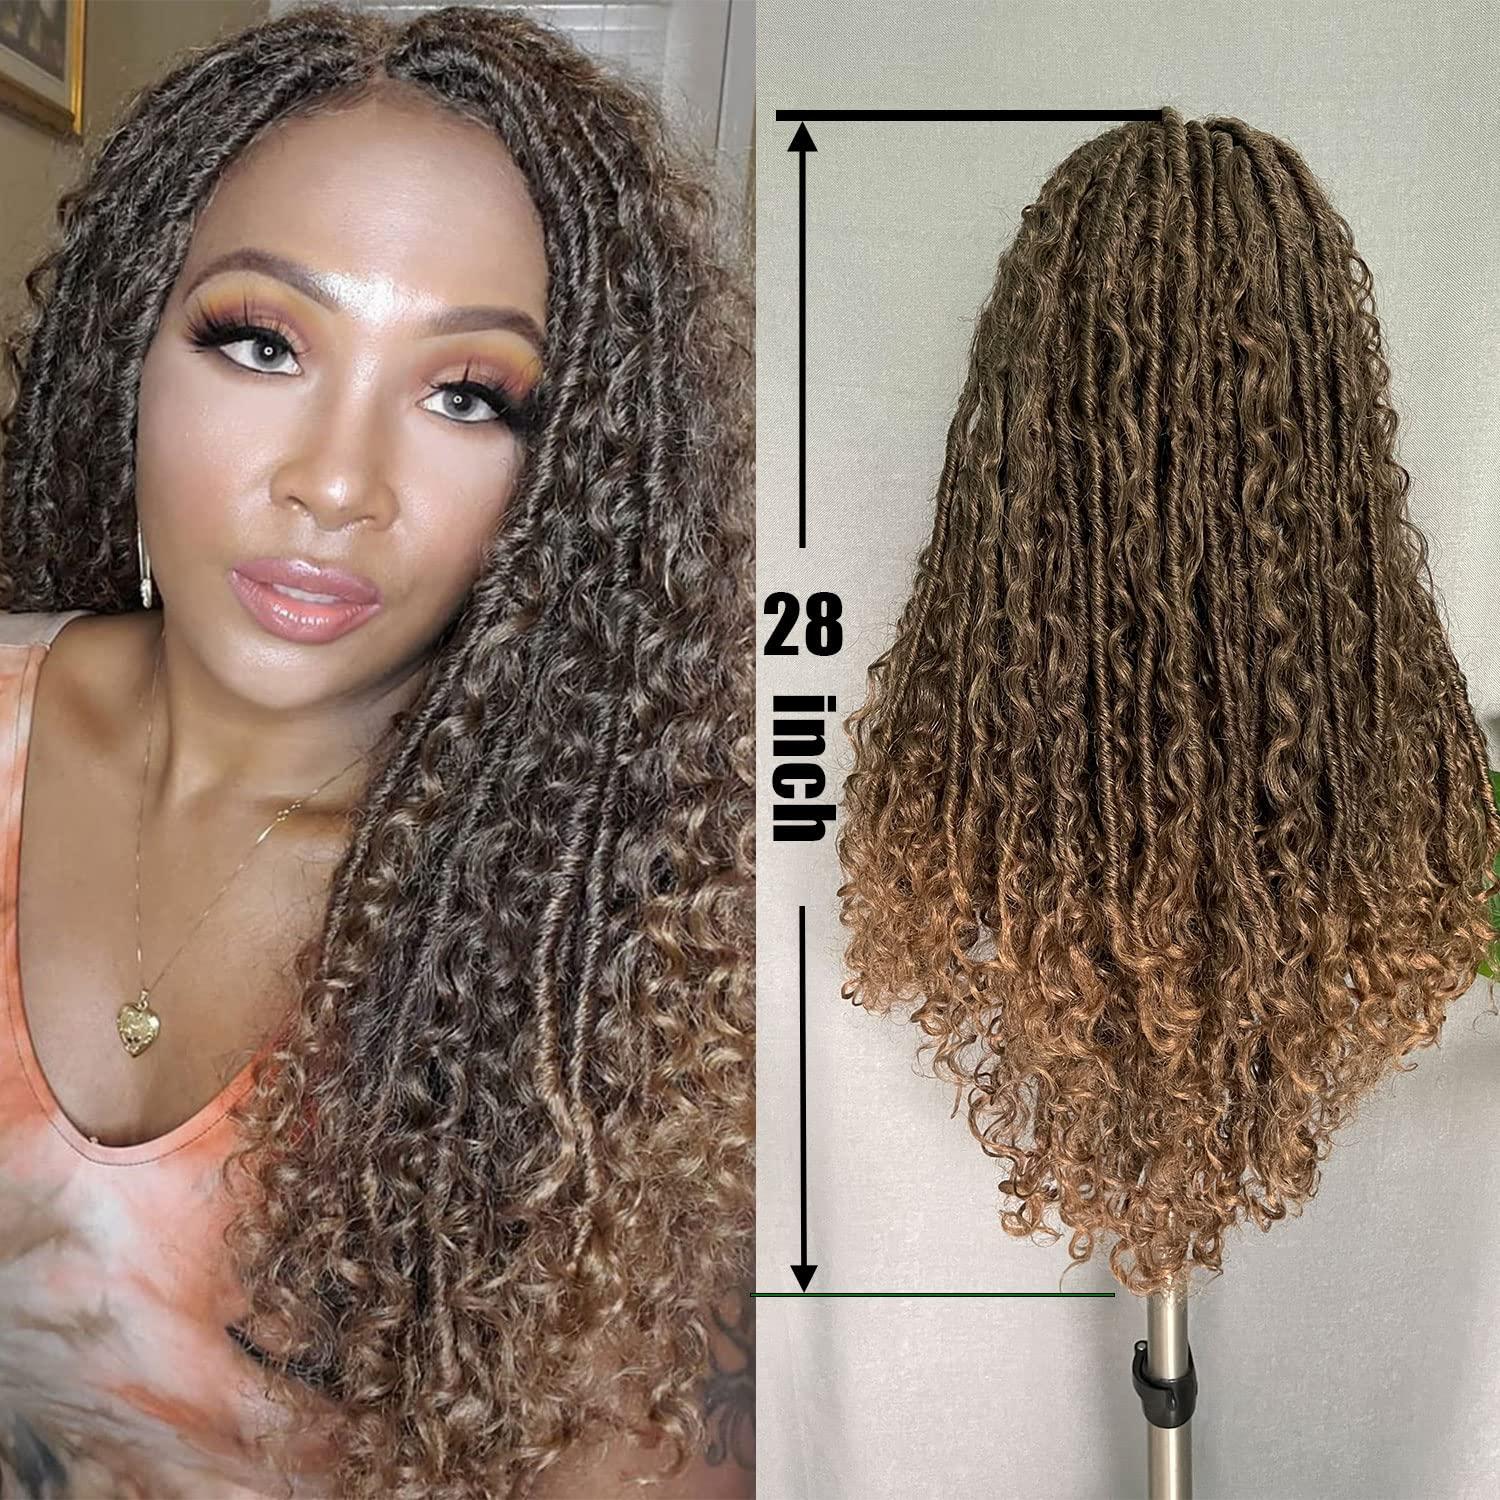 SOKU Lace Front Faux Locs Braided Wig 28 Swiss Lace Ombre Brown